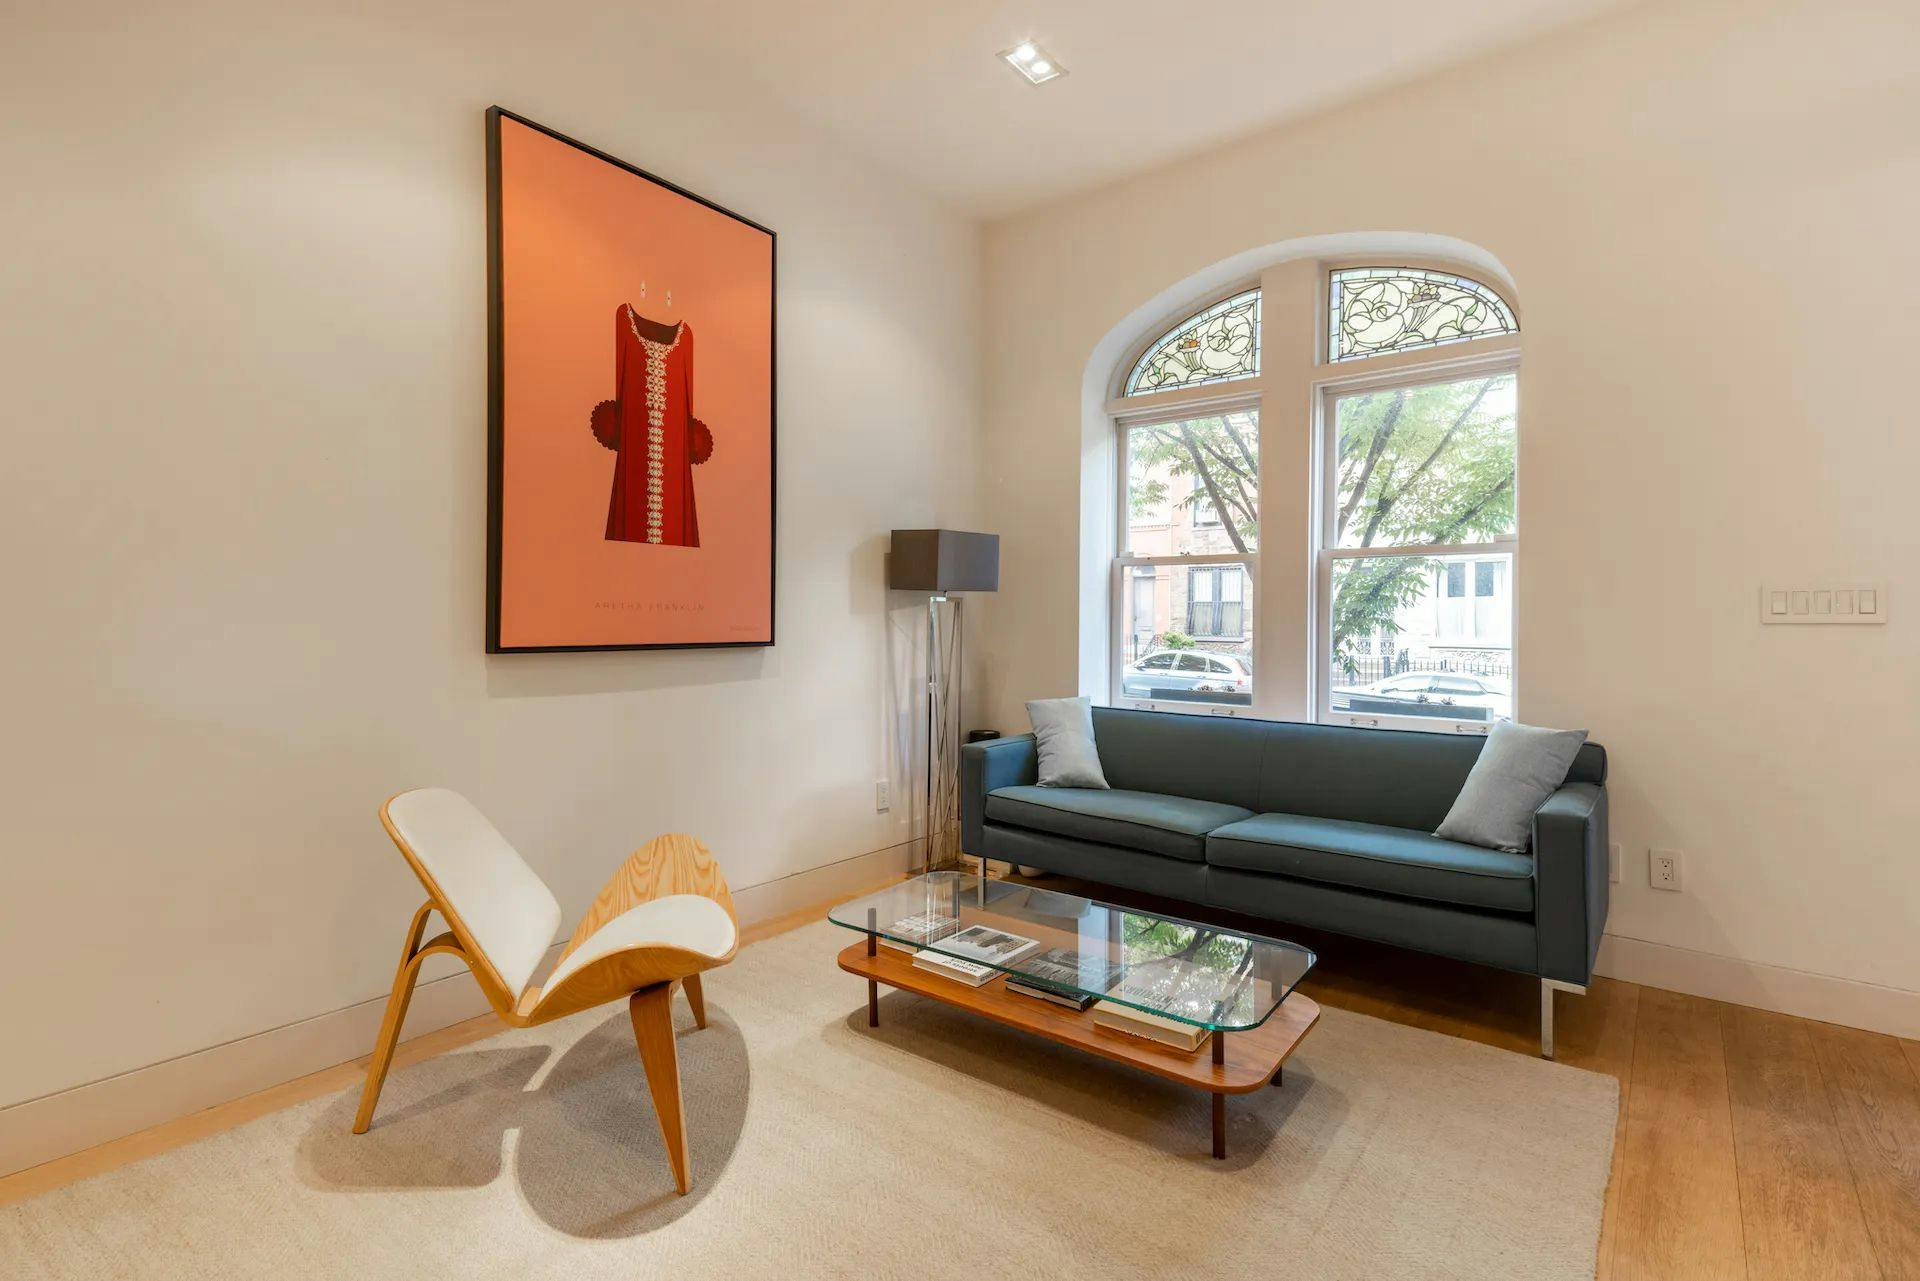 How to Find a Short Term Furnished Rental in NYC